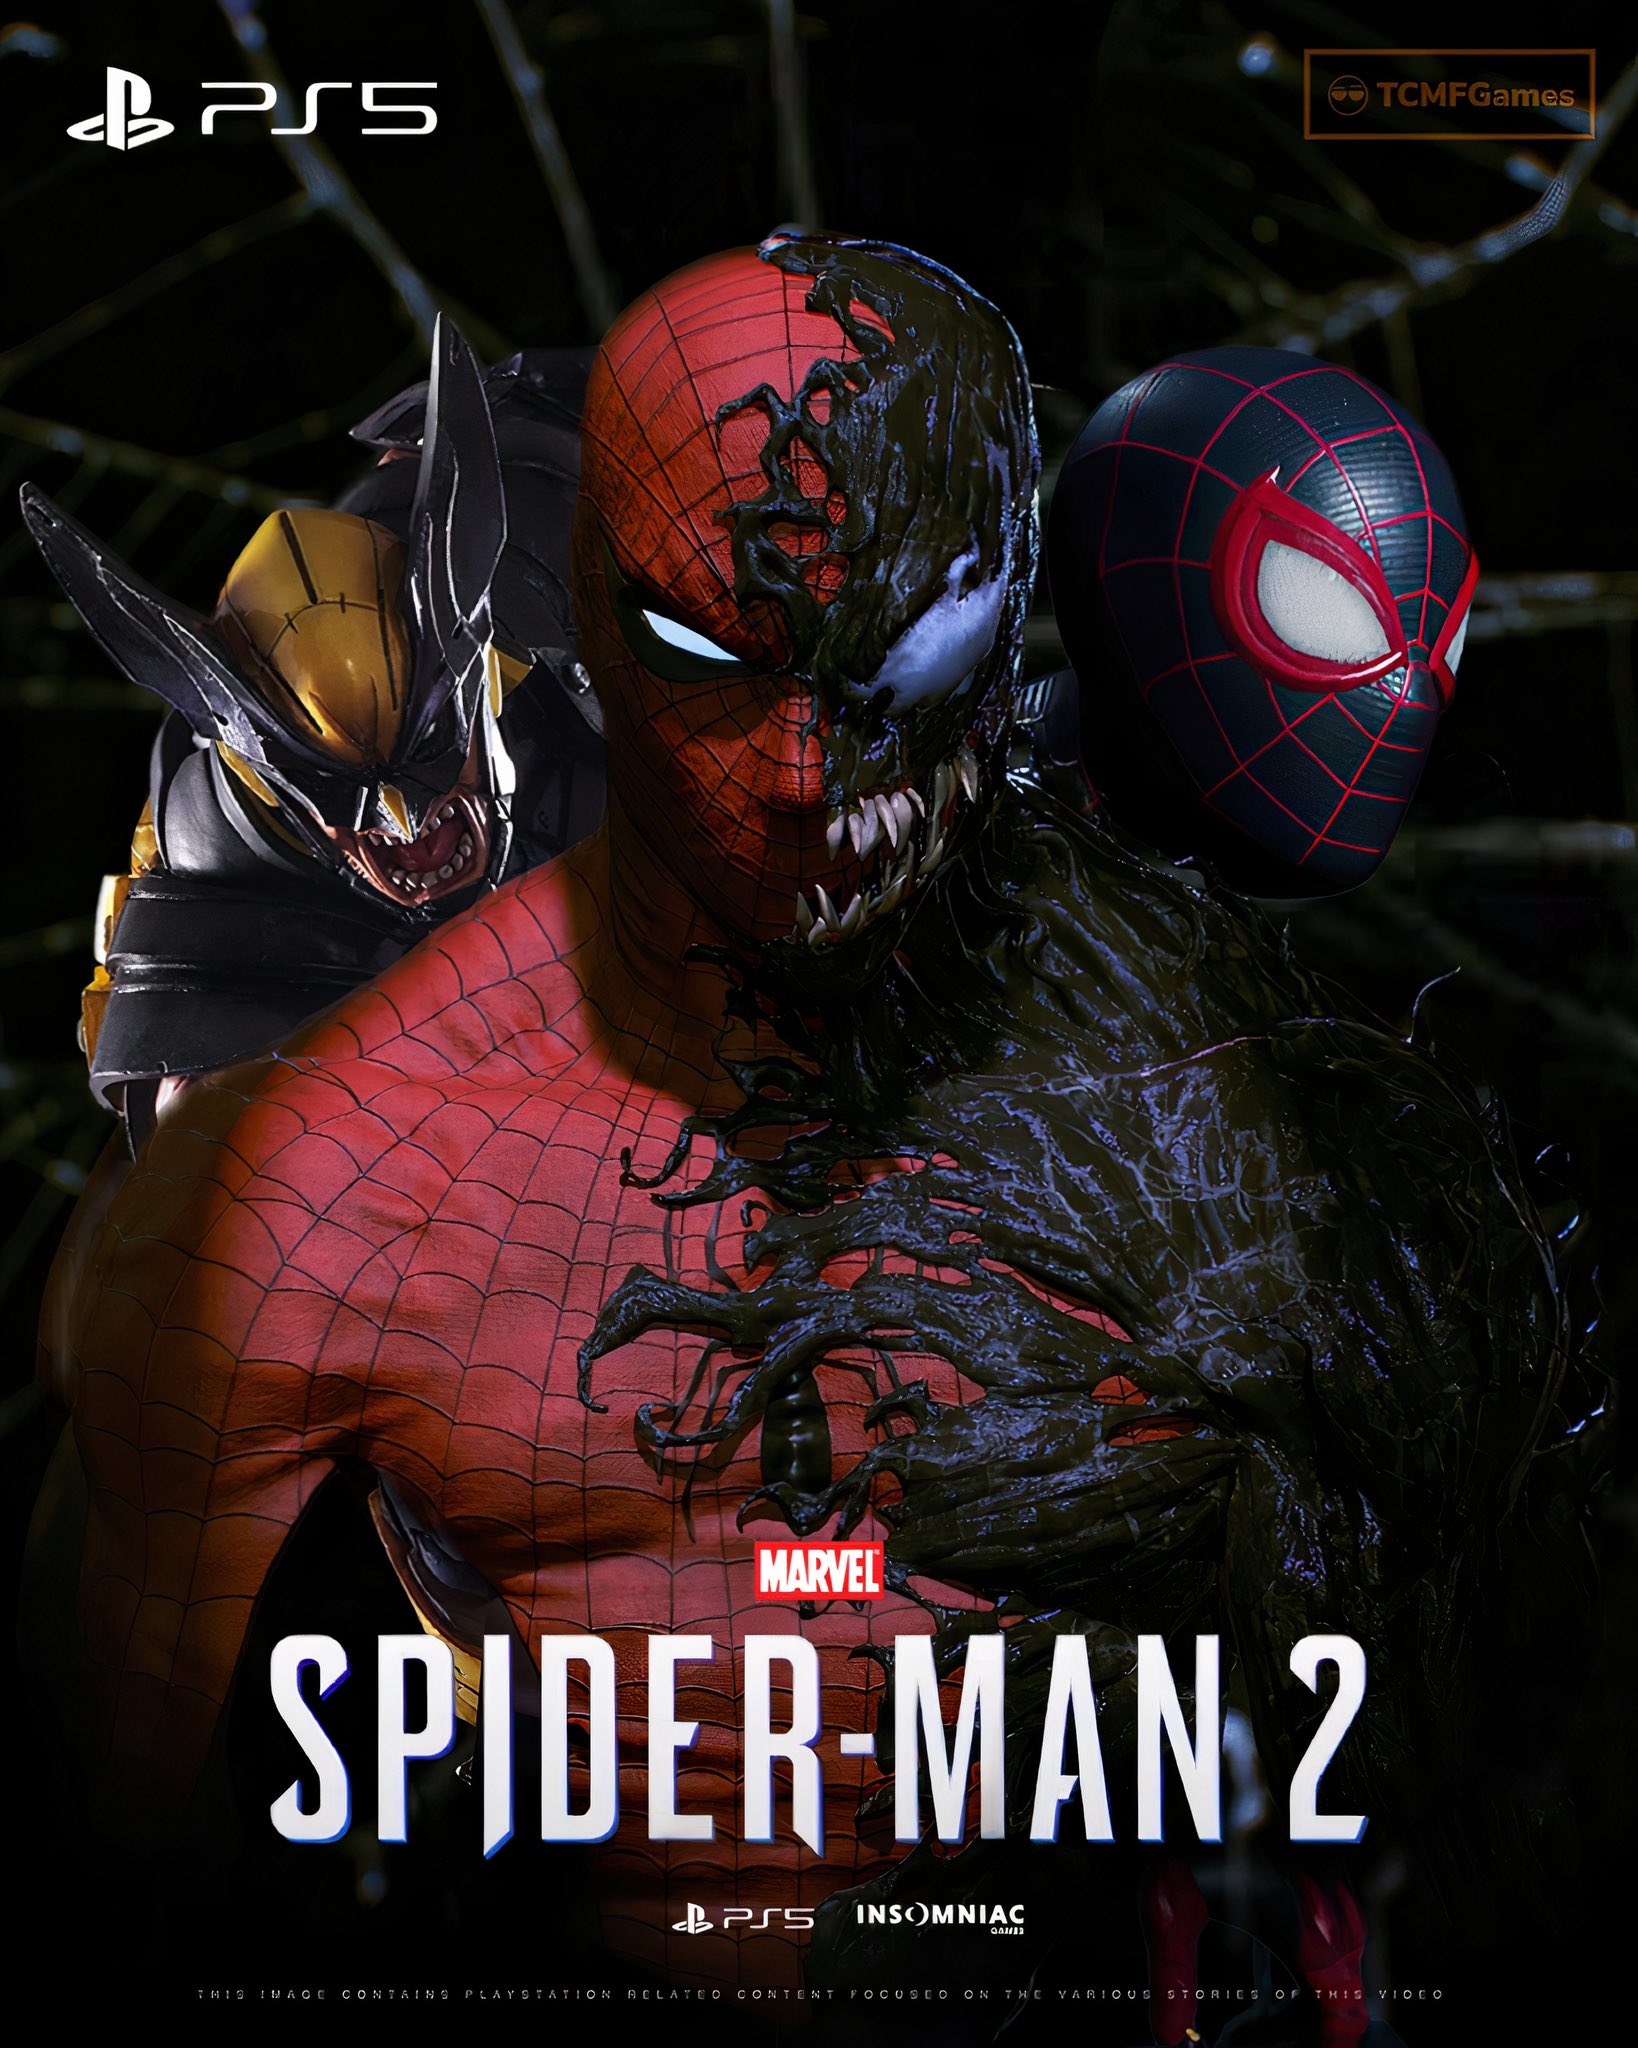 TCMFGames ❄️ on Twitter: "Super hype levels for Spider-Man 2 and Wolverine - | PlayStation https://t.co/FHfQR63lSA" / Twitter